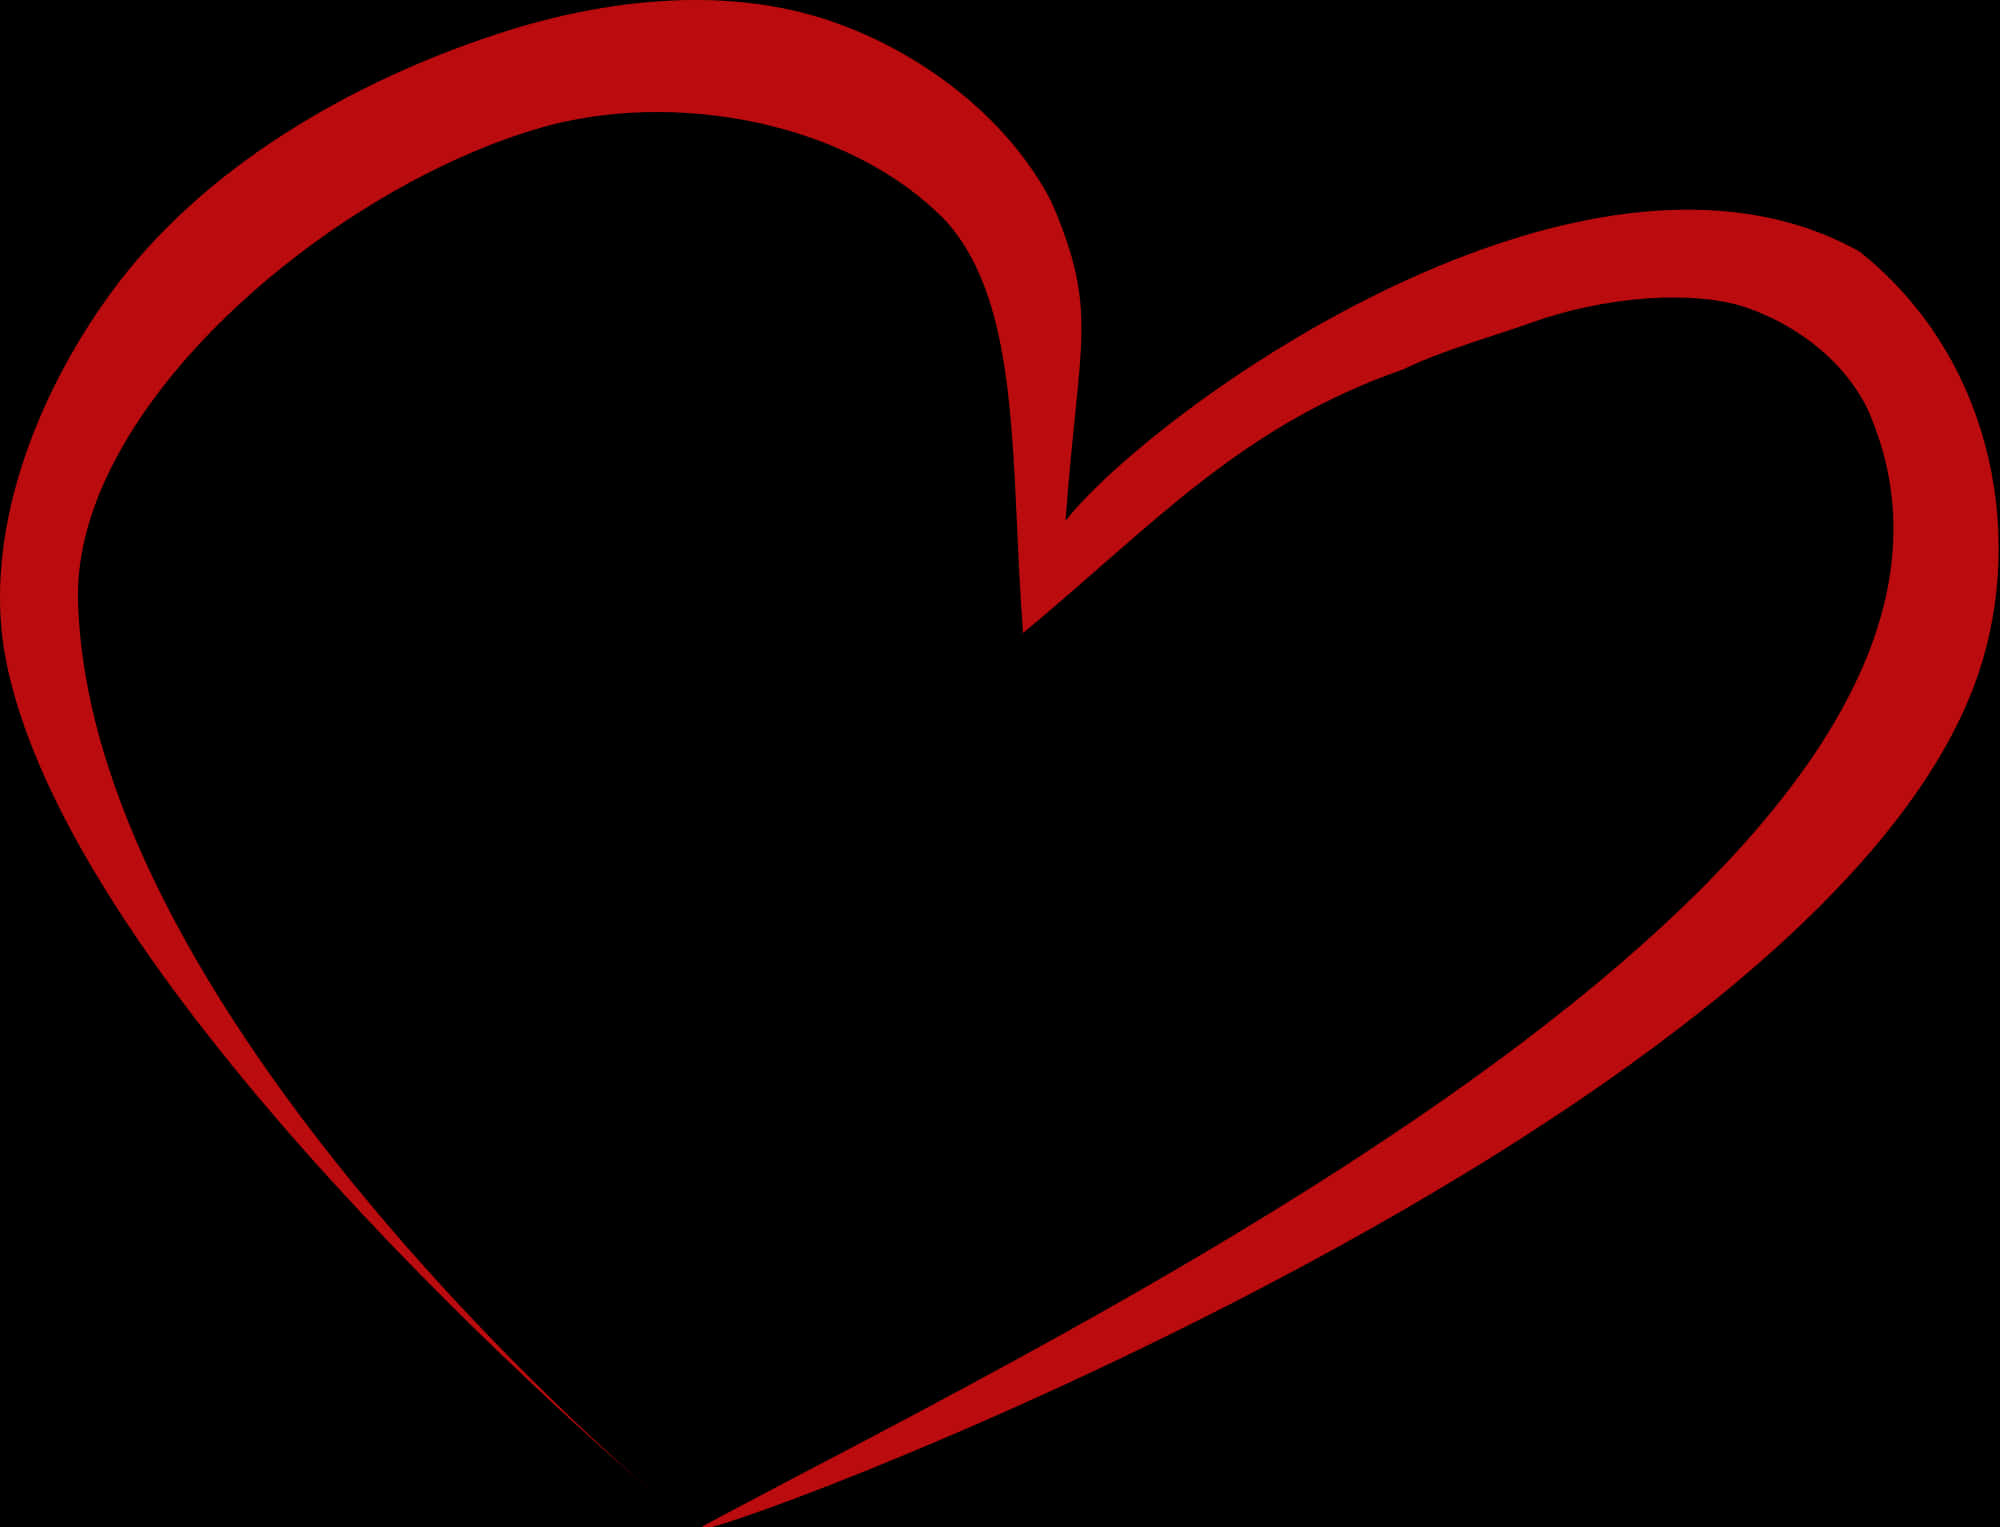 Red Outline Hearton Black Background PNG